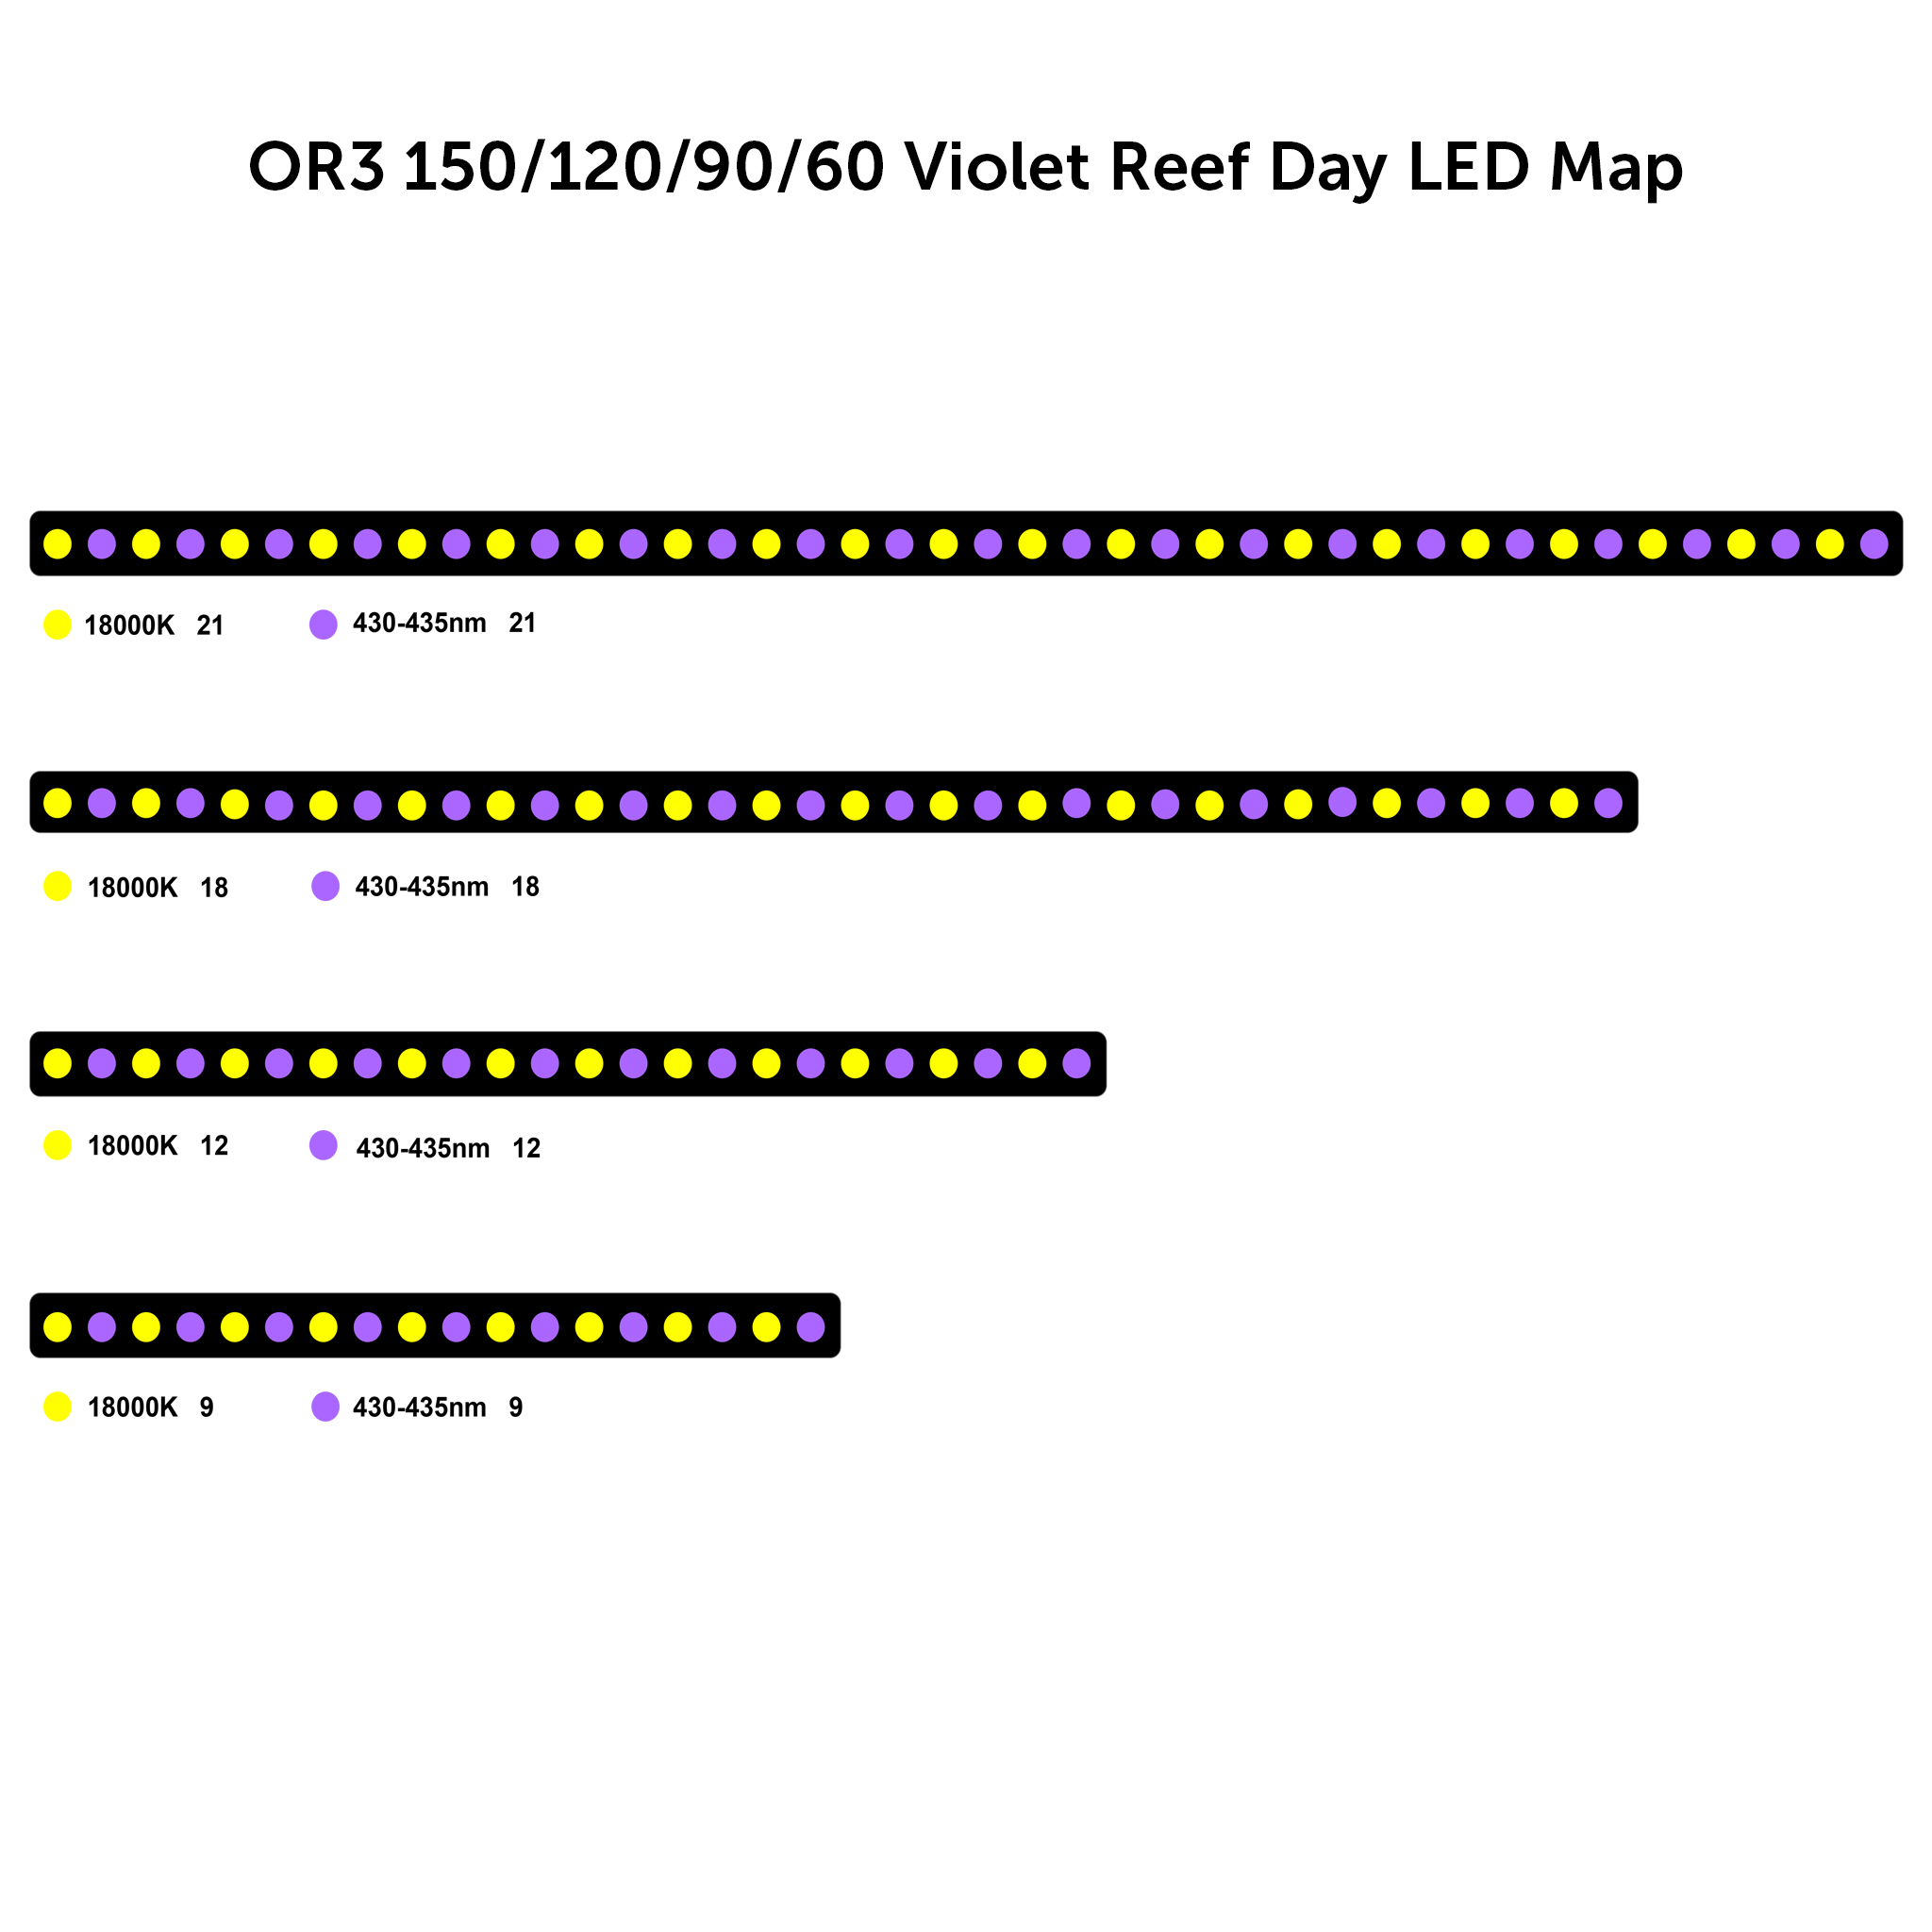 OR3 violet reef day led map